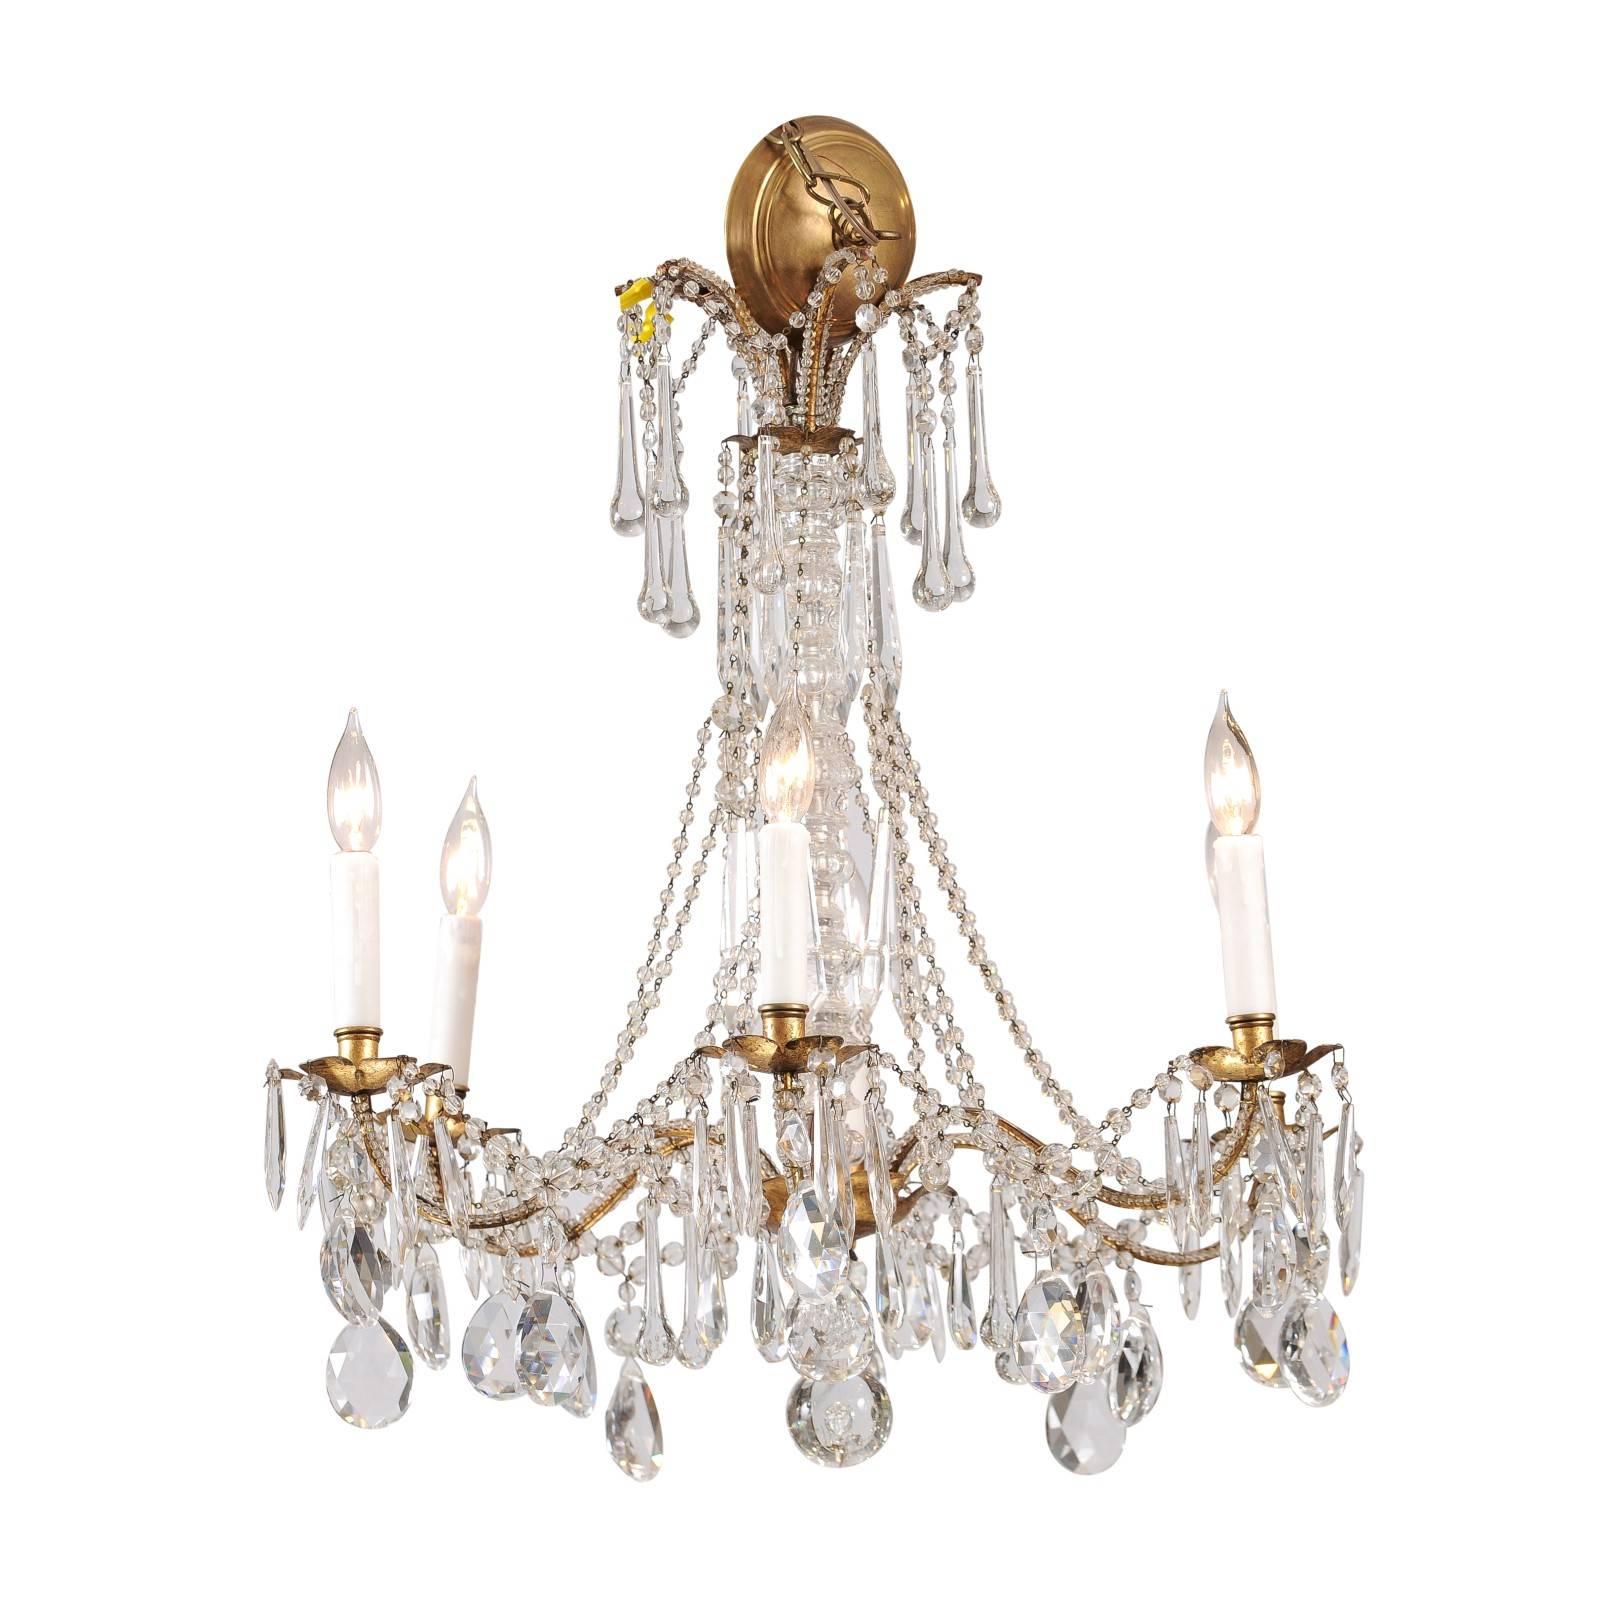 French Vintage Six-Light Crystal Chandelier with Gilt Metal Armature, circa 1930